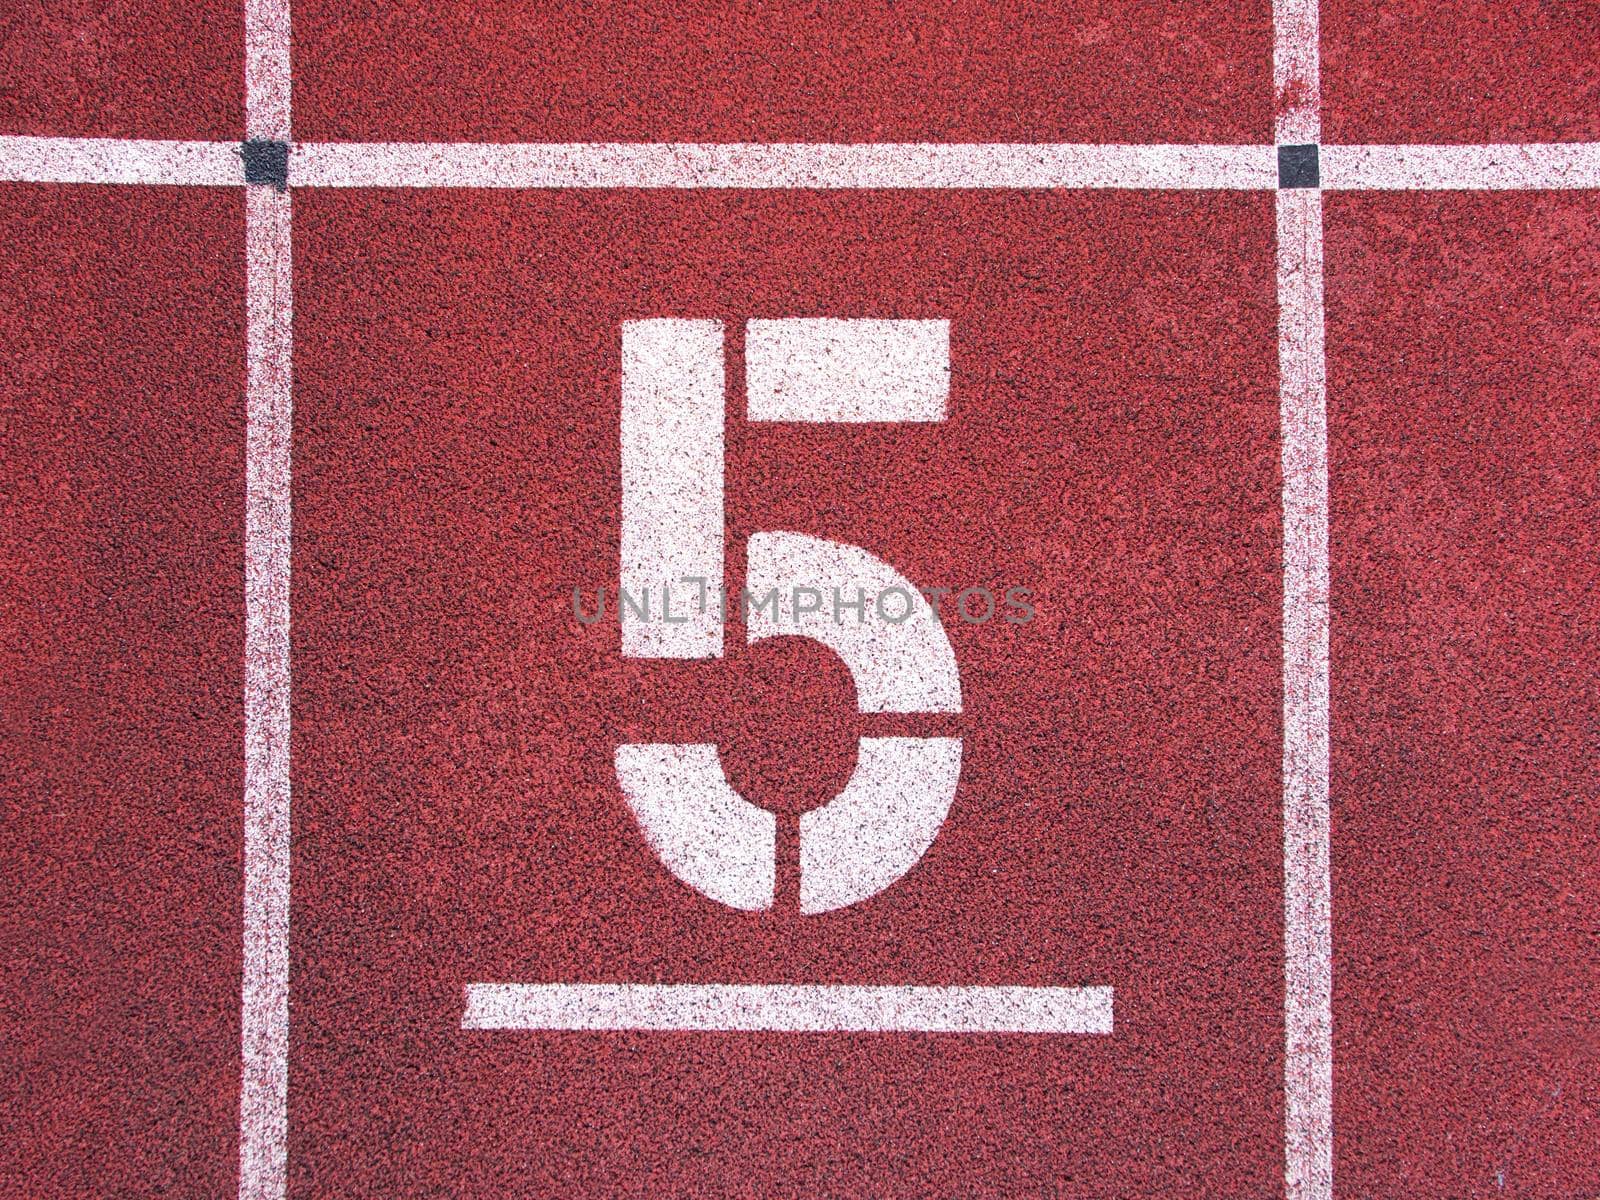 Number five. Big white track number on red rubber racetrack. Gentle textured running racetracks in athletic outdoor stadium. by rdonar2